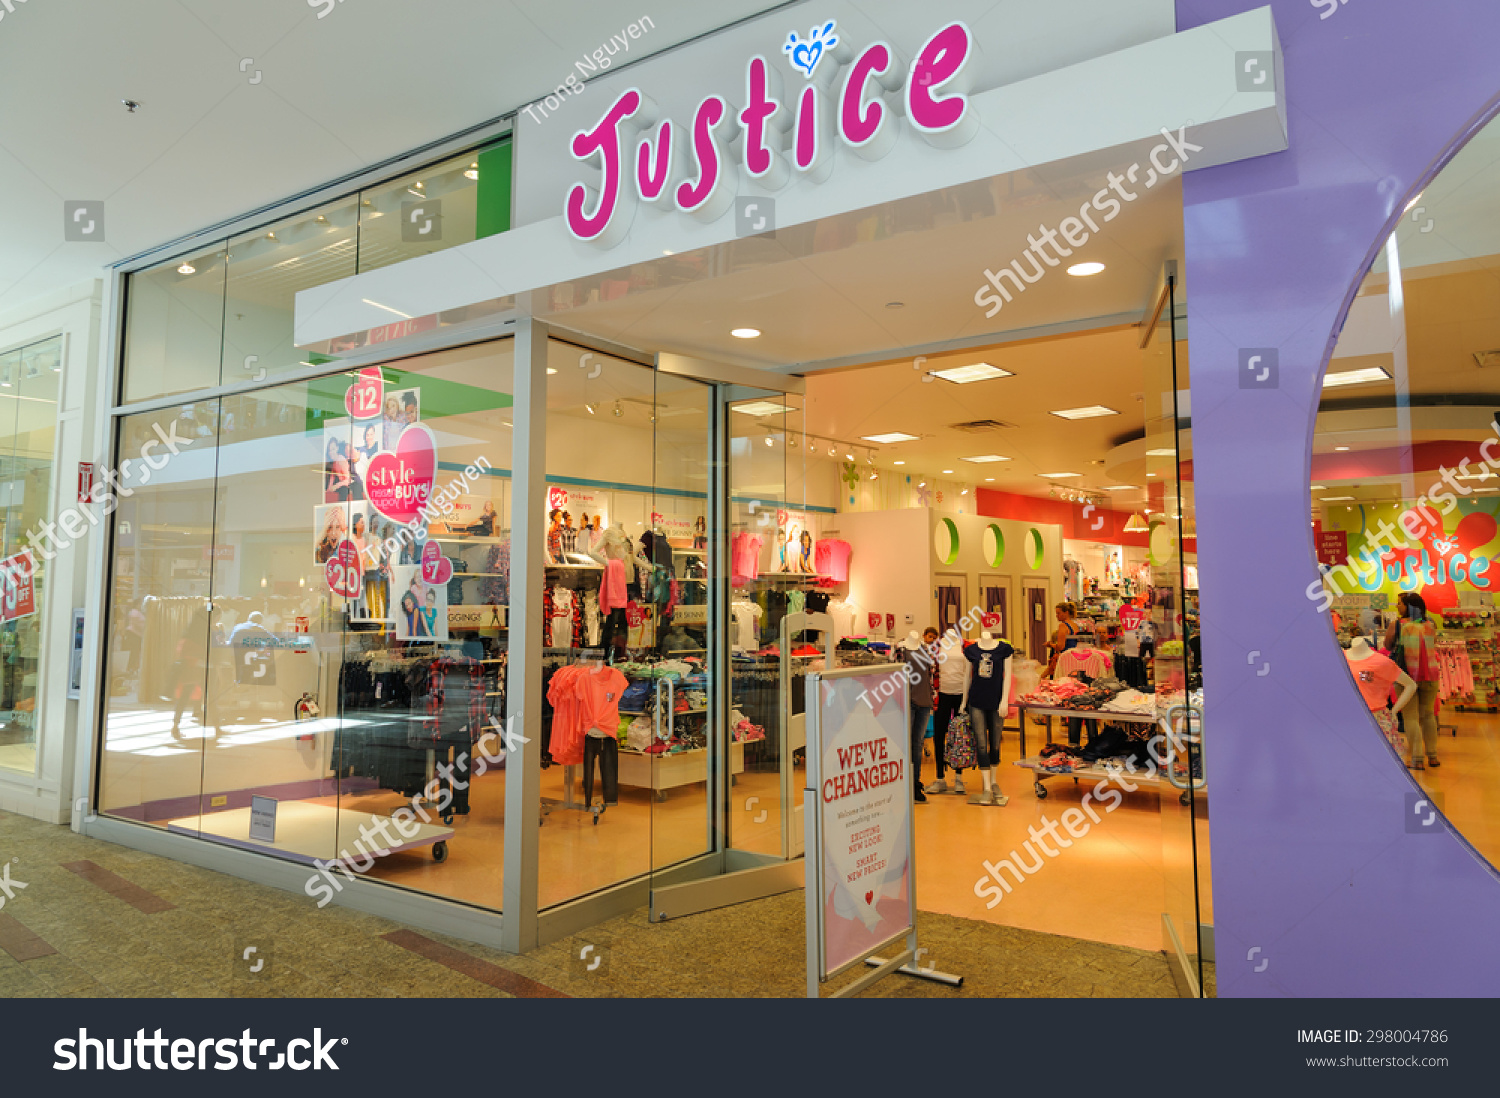 justice kids store